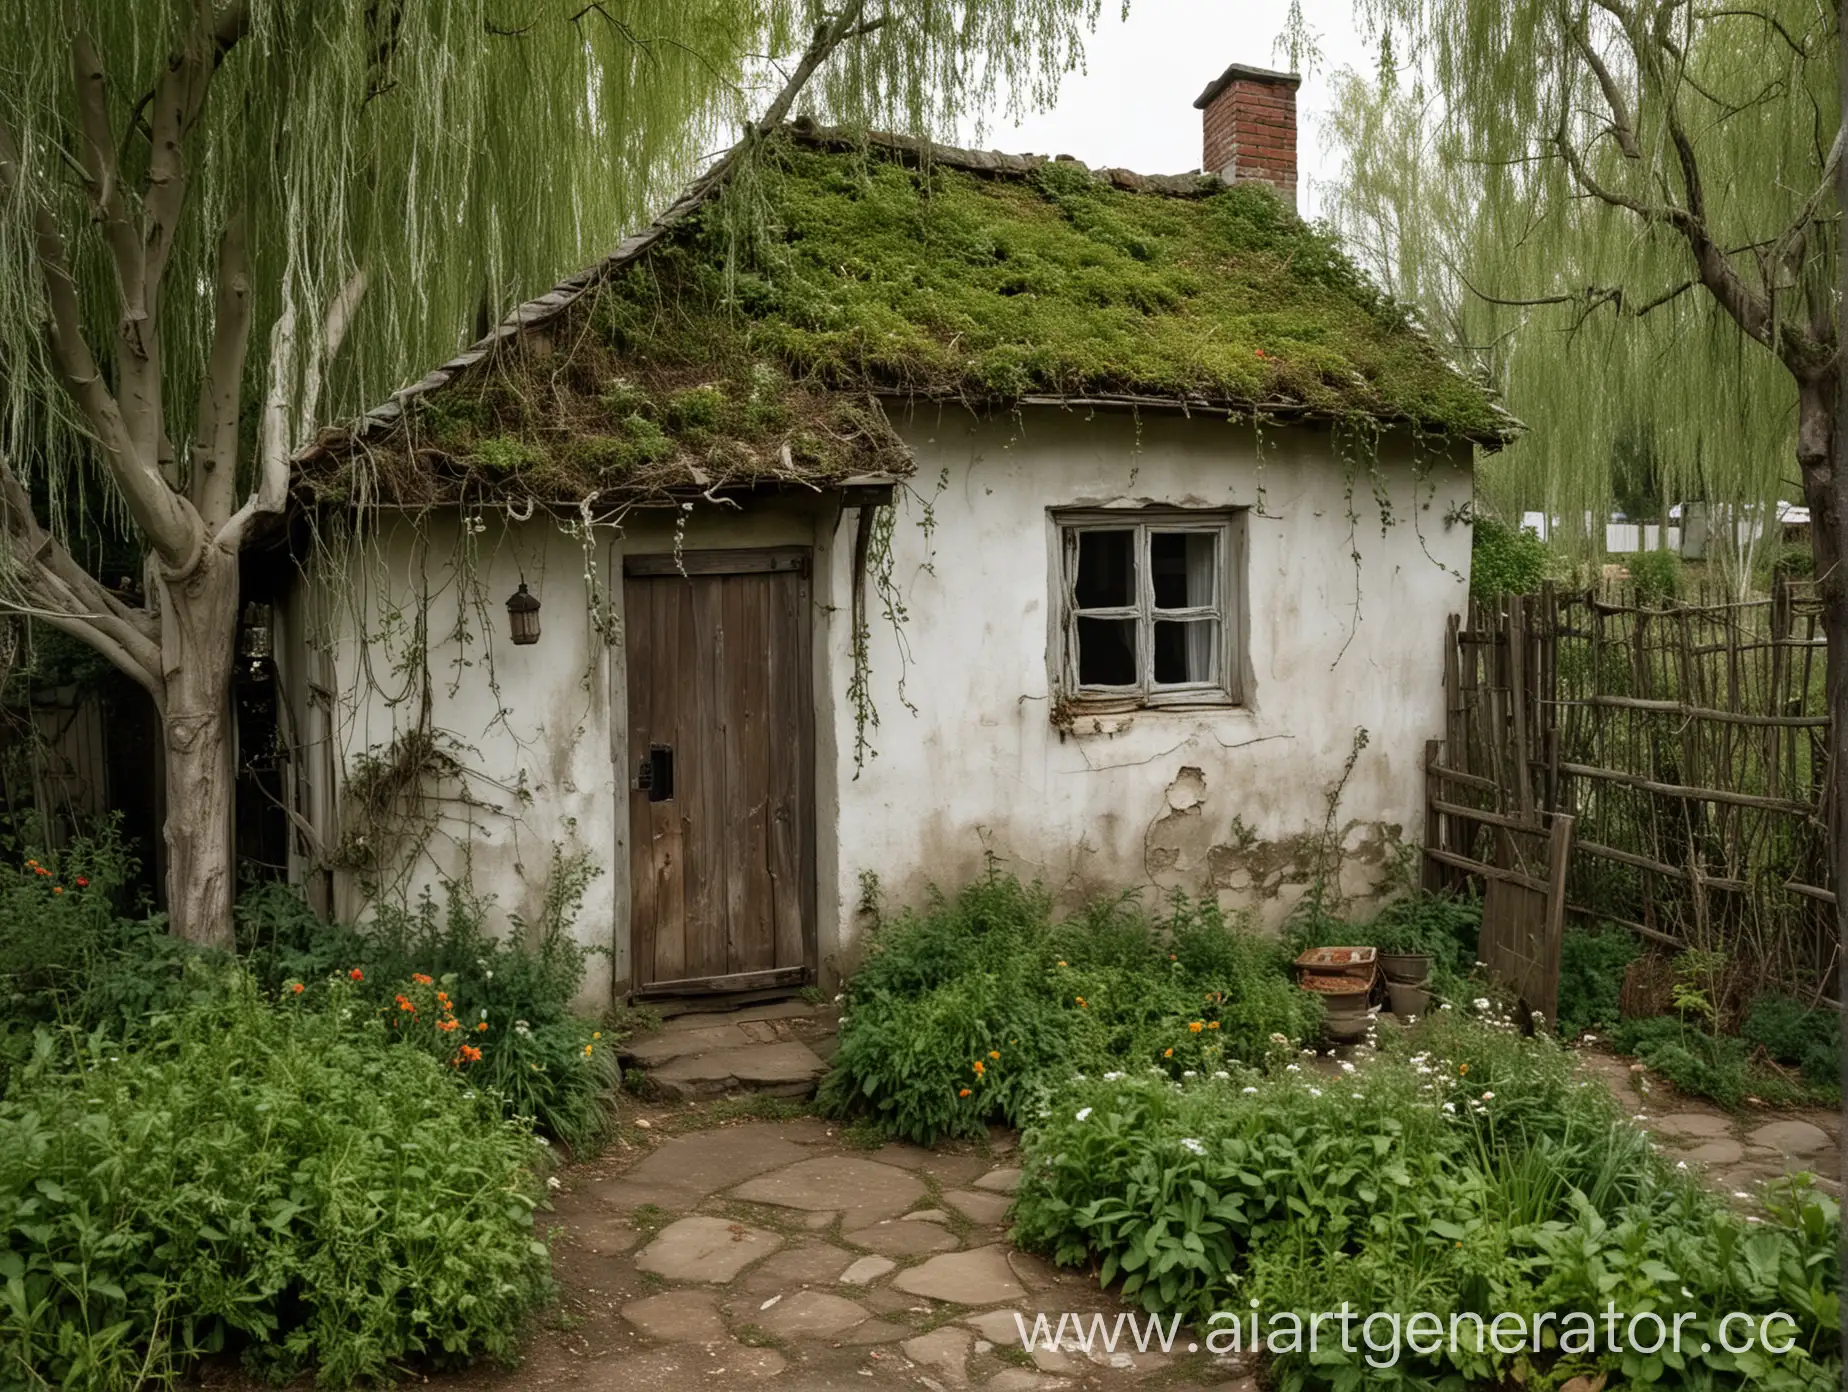 Aged-Cottage-Surrounded-by-WellGroomed-Garden-on-Riverbank